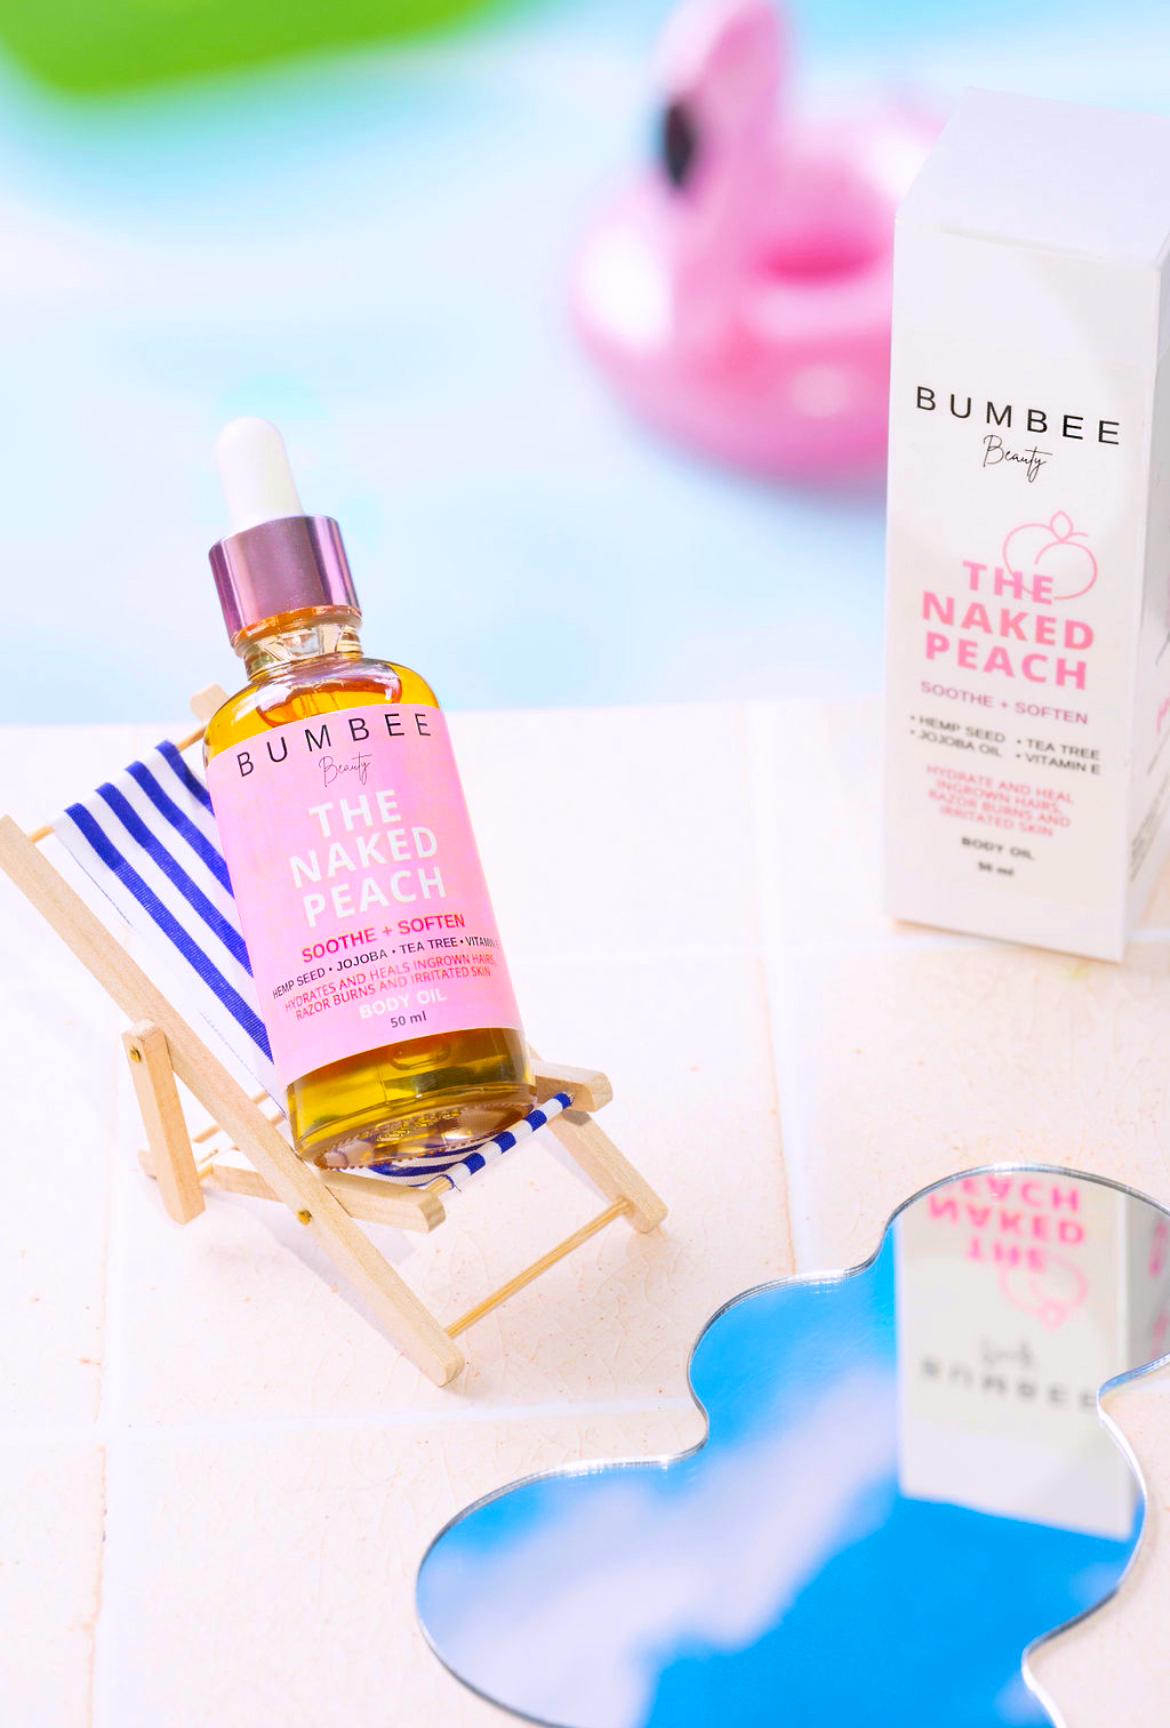 Naked Peach body oil displayed against a poolside setting, highlighting its effectiveness in soothing razor burn on the bikini line. The image suggests a carefree poolside experience, emphasizing the product's ability to promote confidence and comfort in swimwear by addressing skin irritation